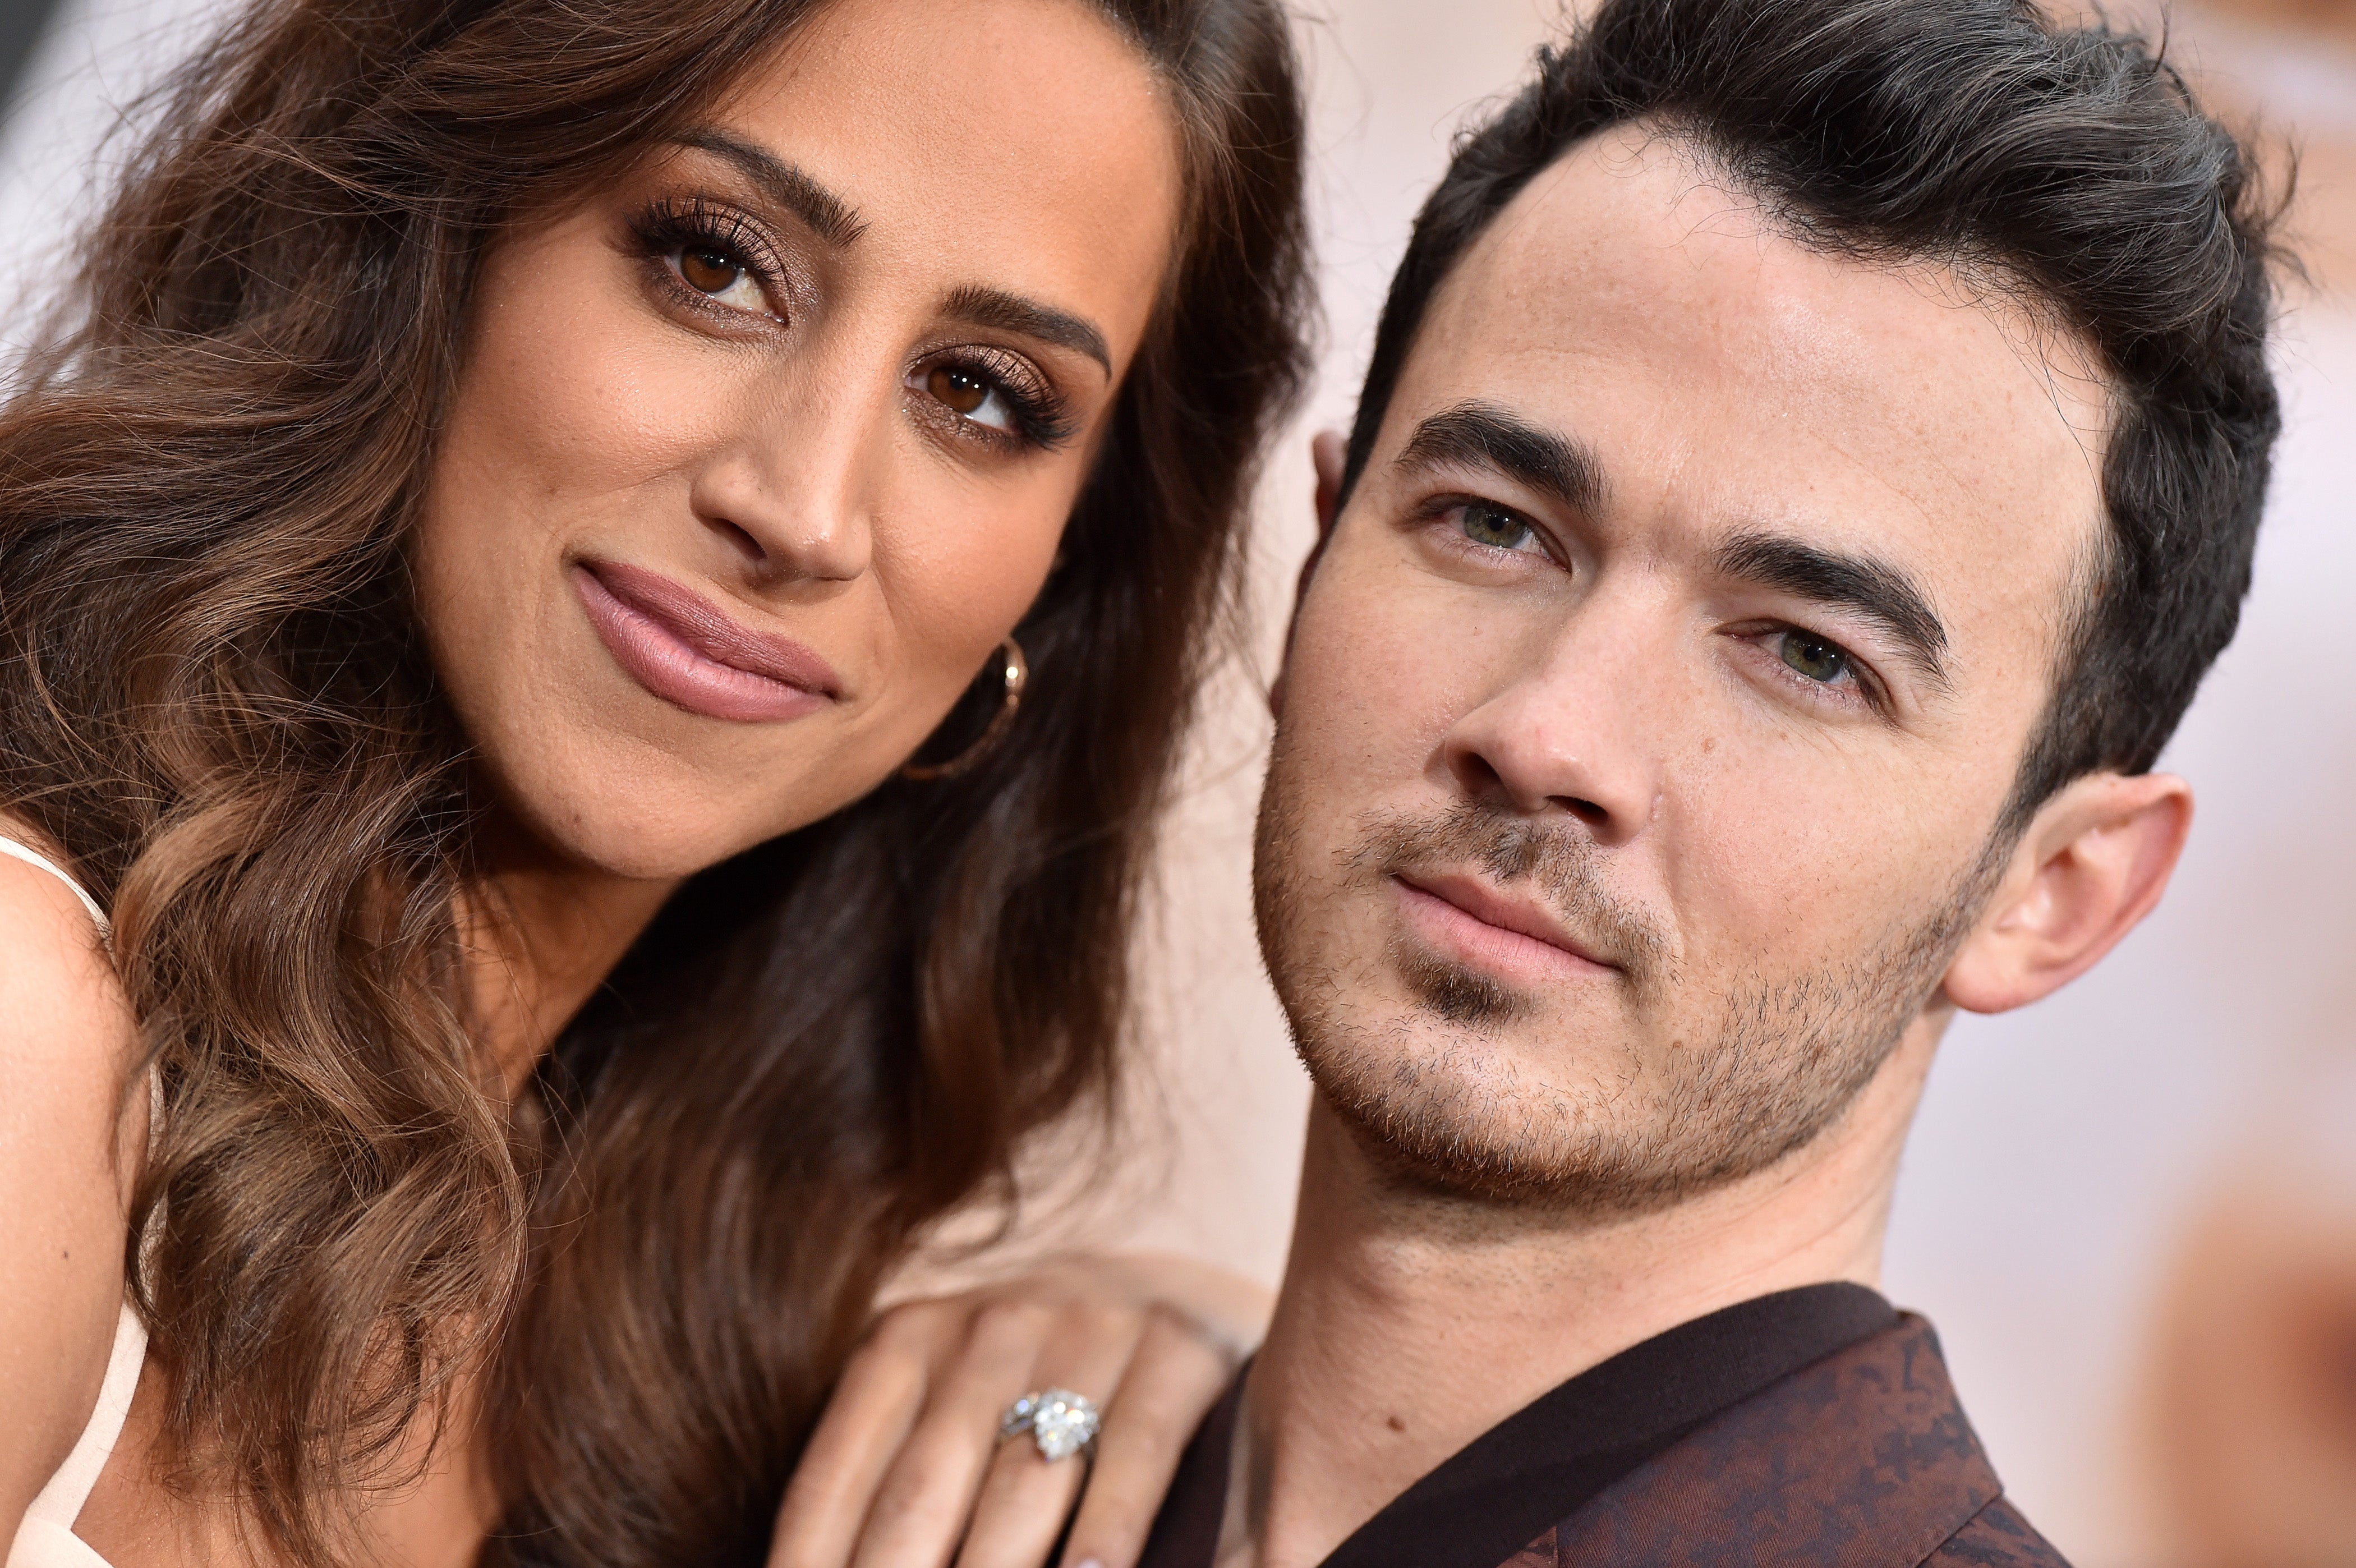 Kevin Jonas Reveals the Spot He Met Wife Danielle in Honor of 11th